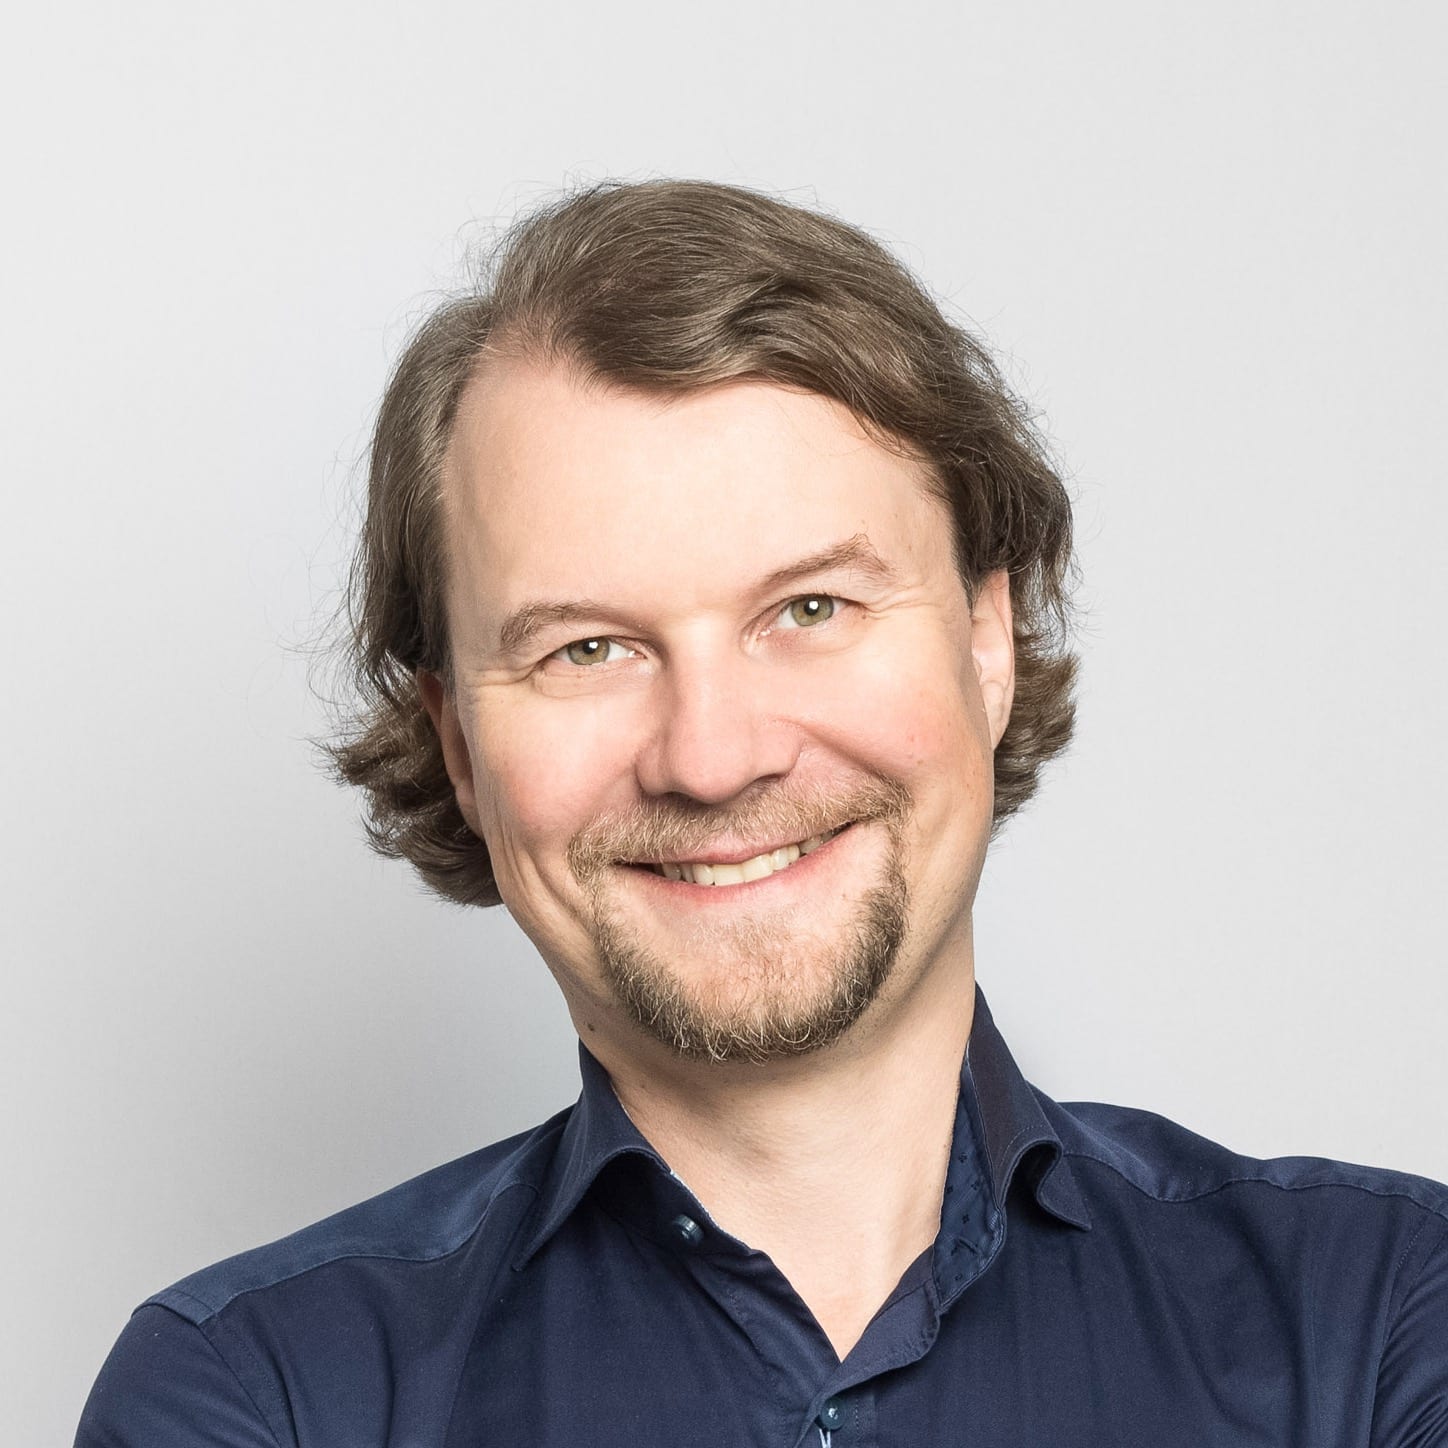 Photo of Mikael Gummerus, CEO at Frosmo